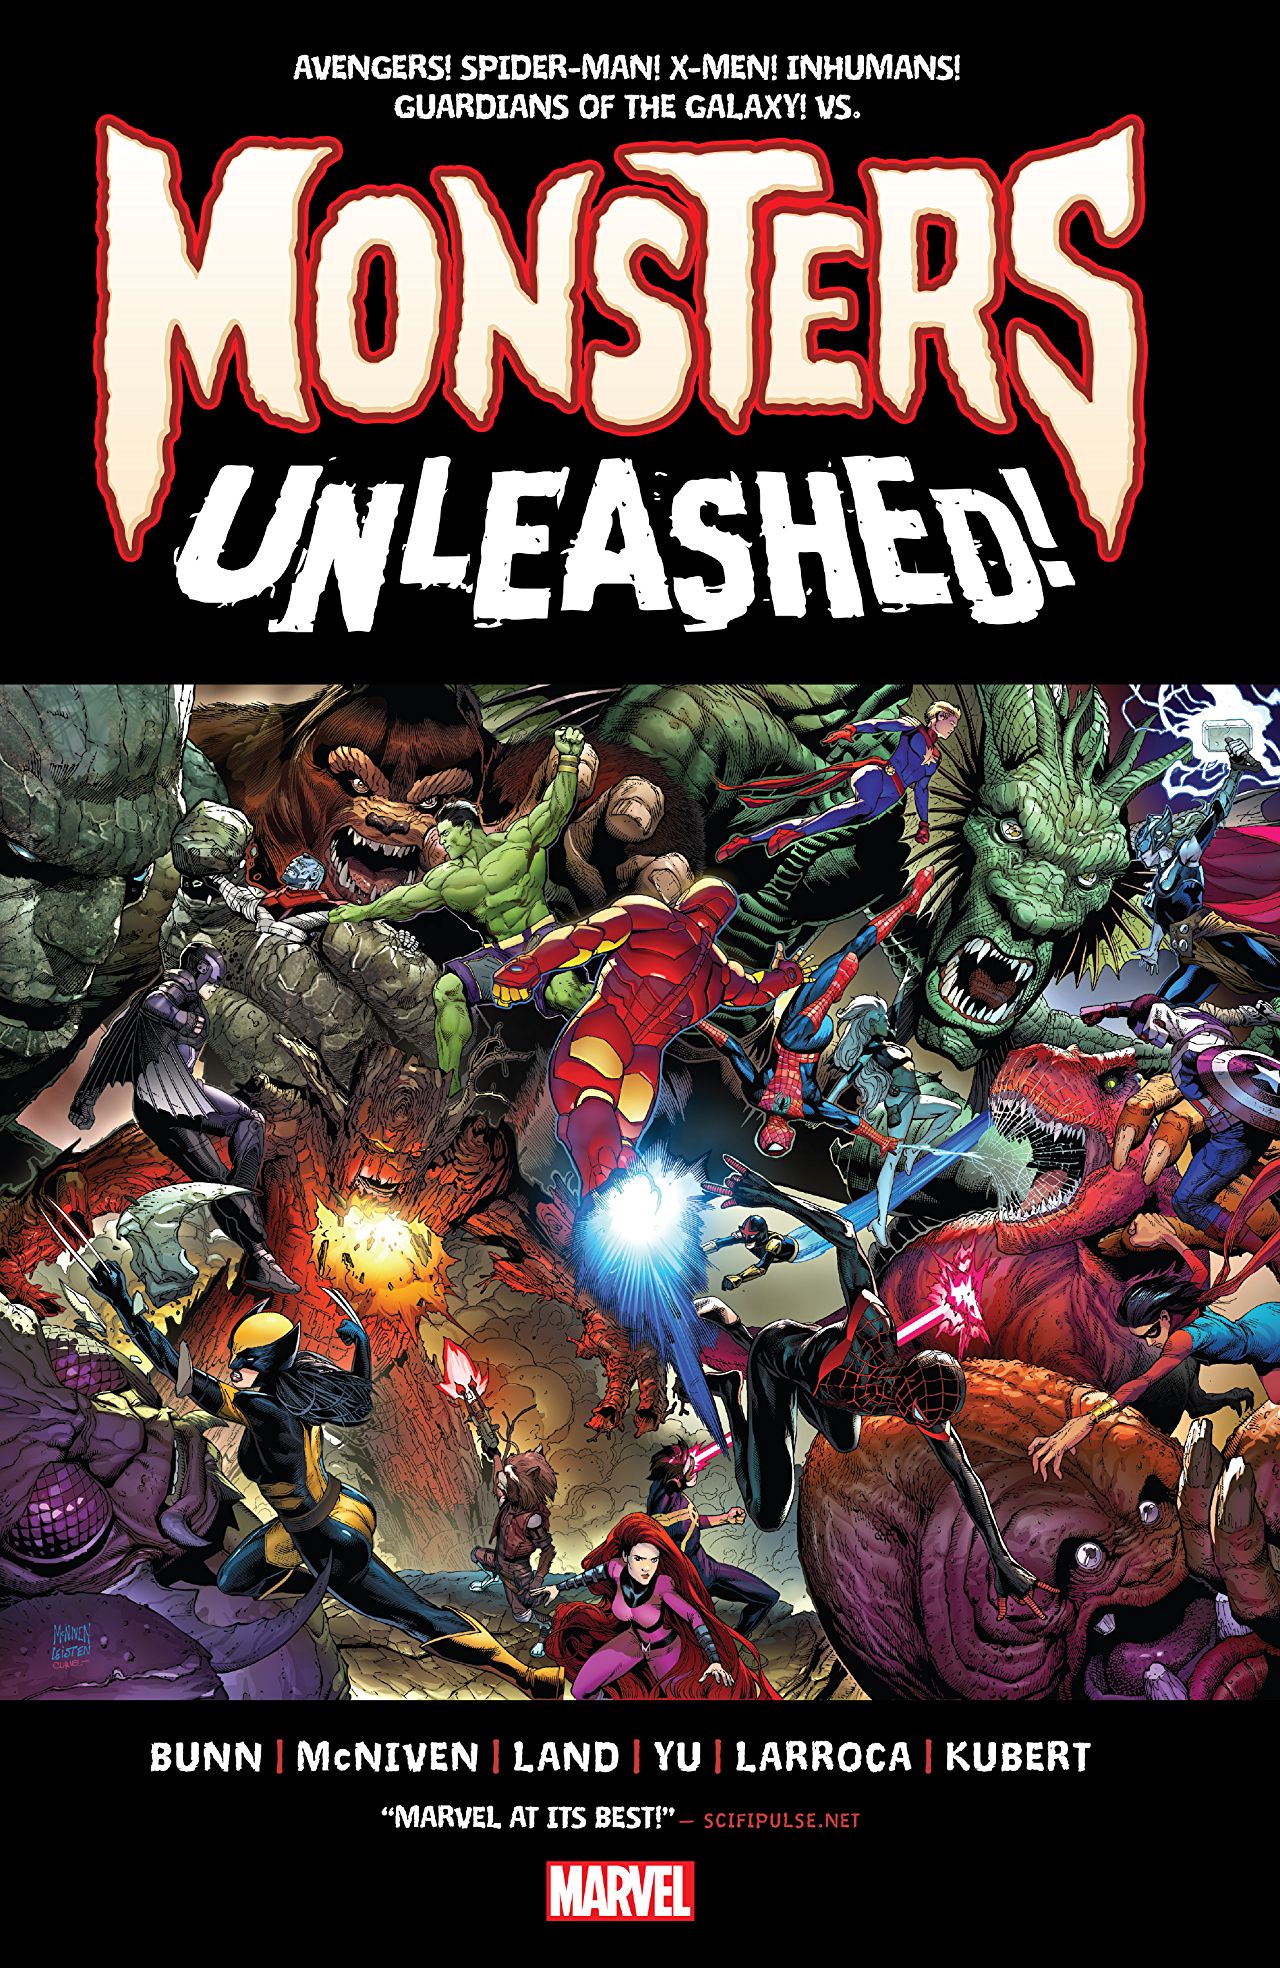 'Monsters Unleashed' is the comic I didn't know I needed